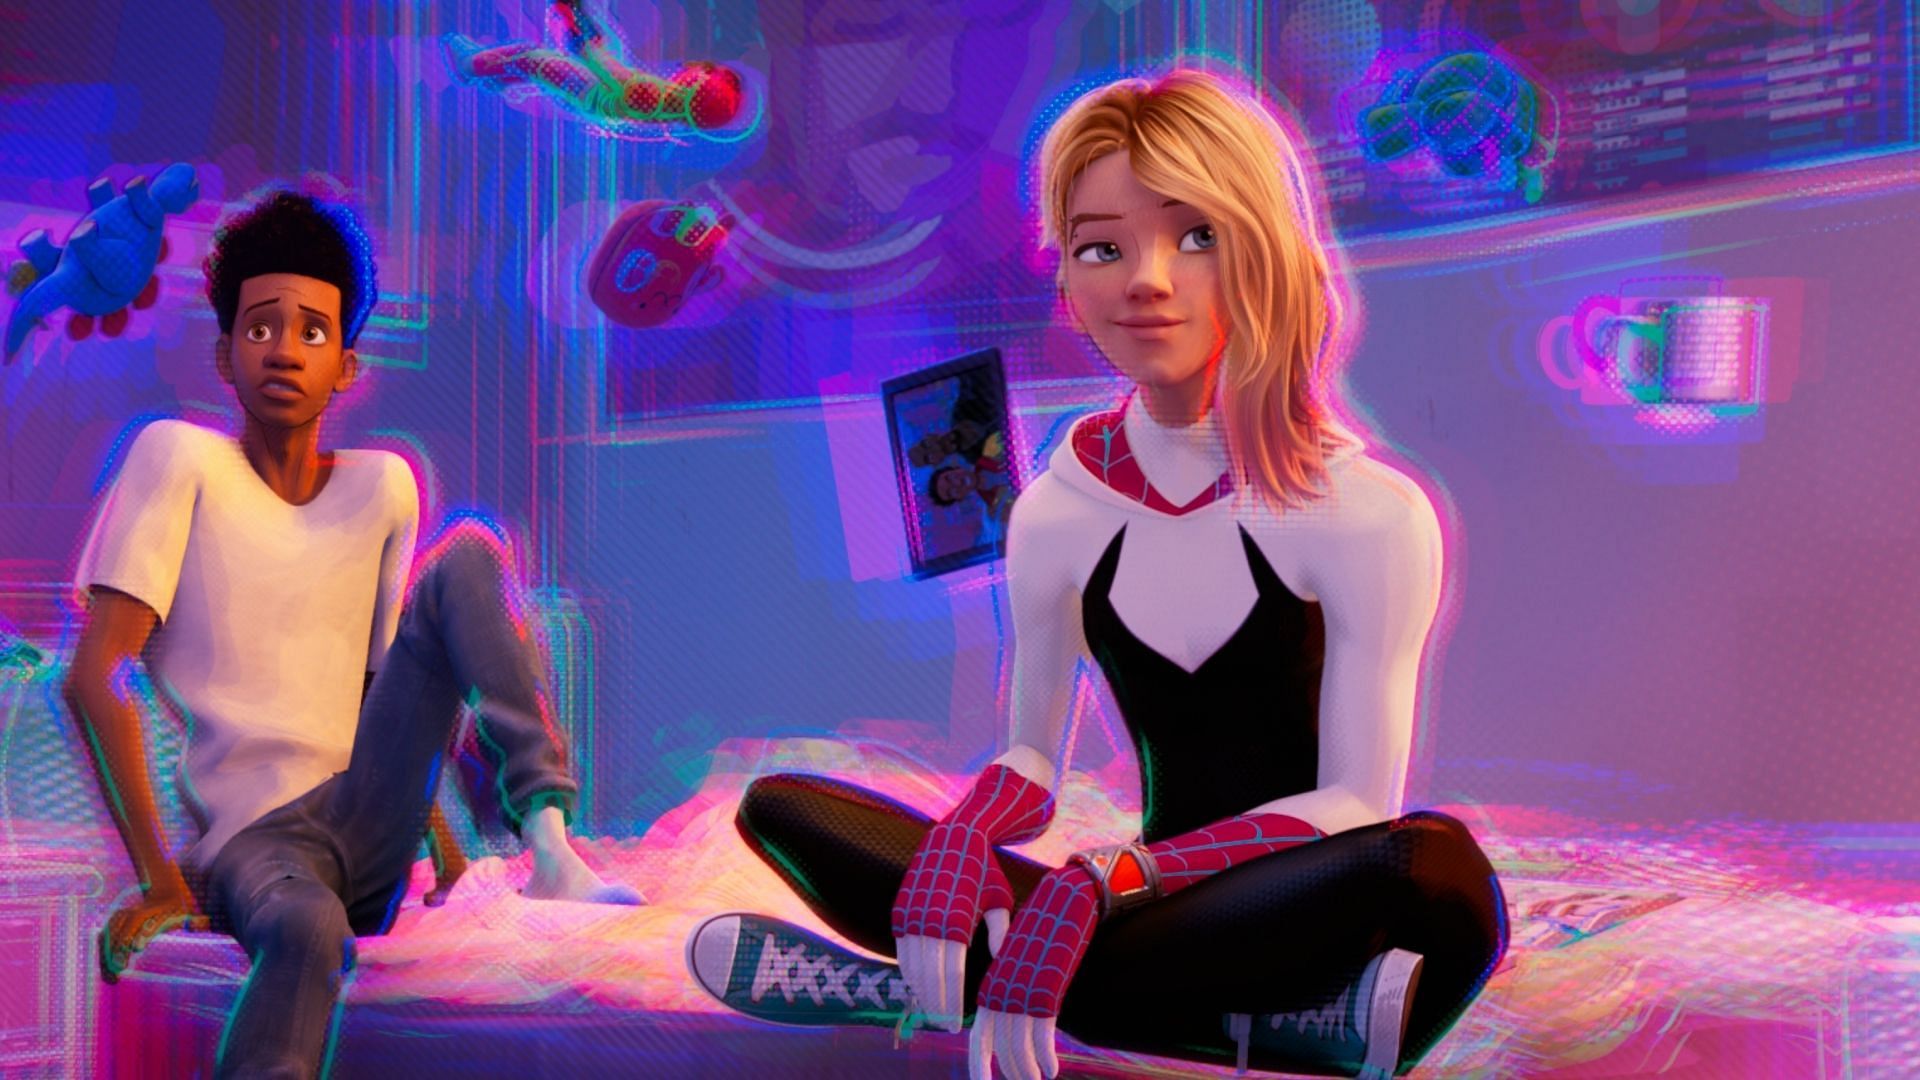 Miles Morales and Gwen Stacy in Spider-Man: Across the Spider-Verse (Image via Sony)